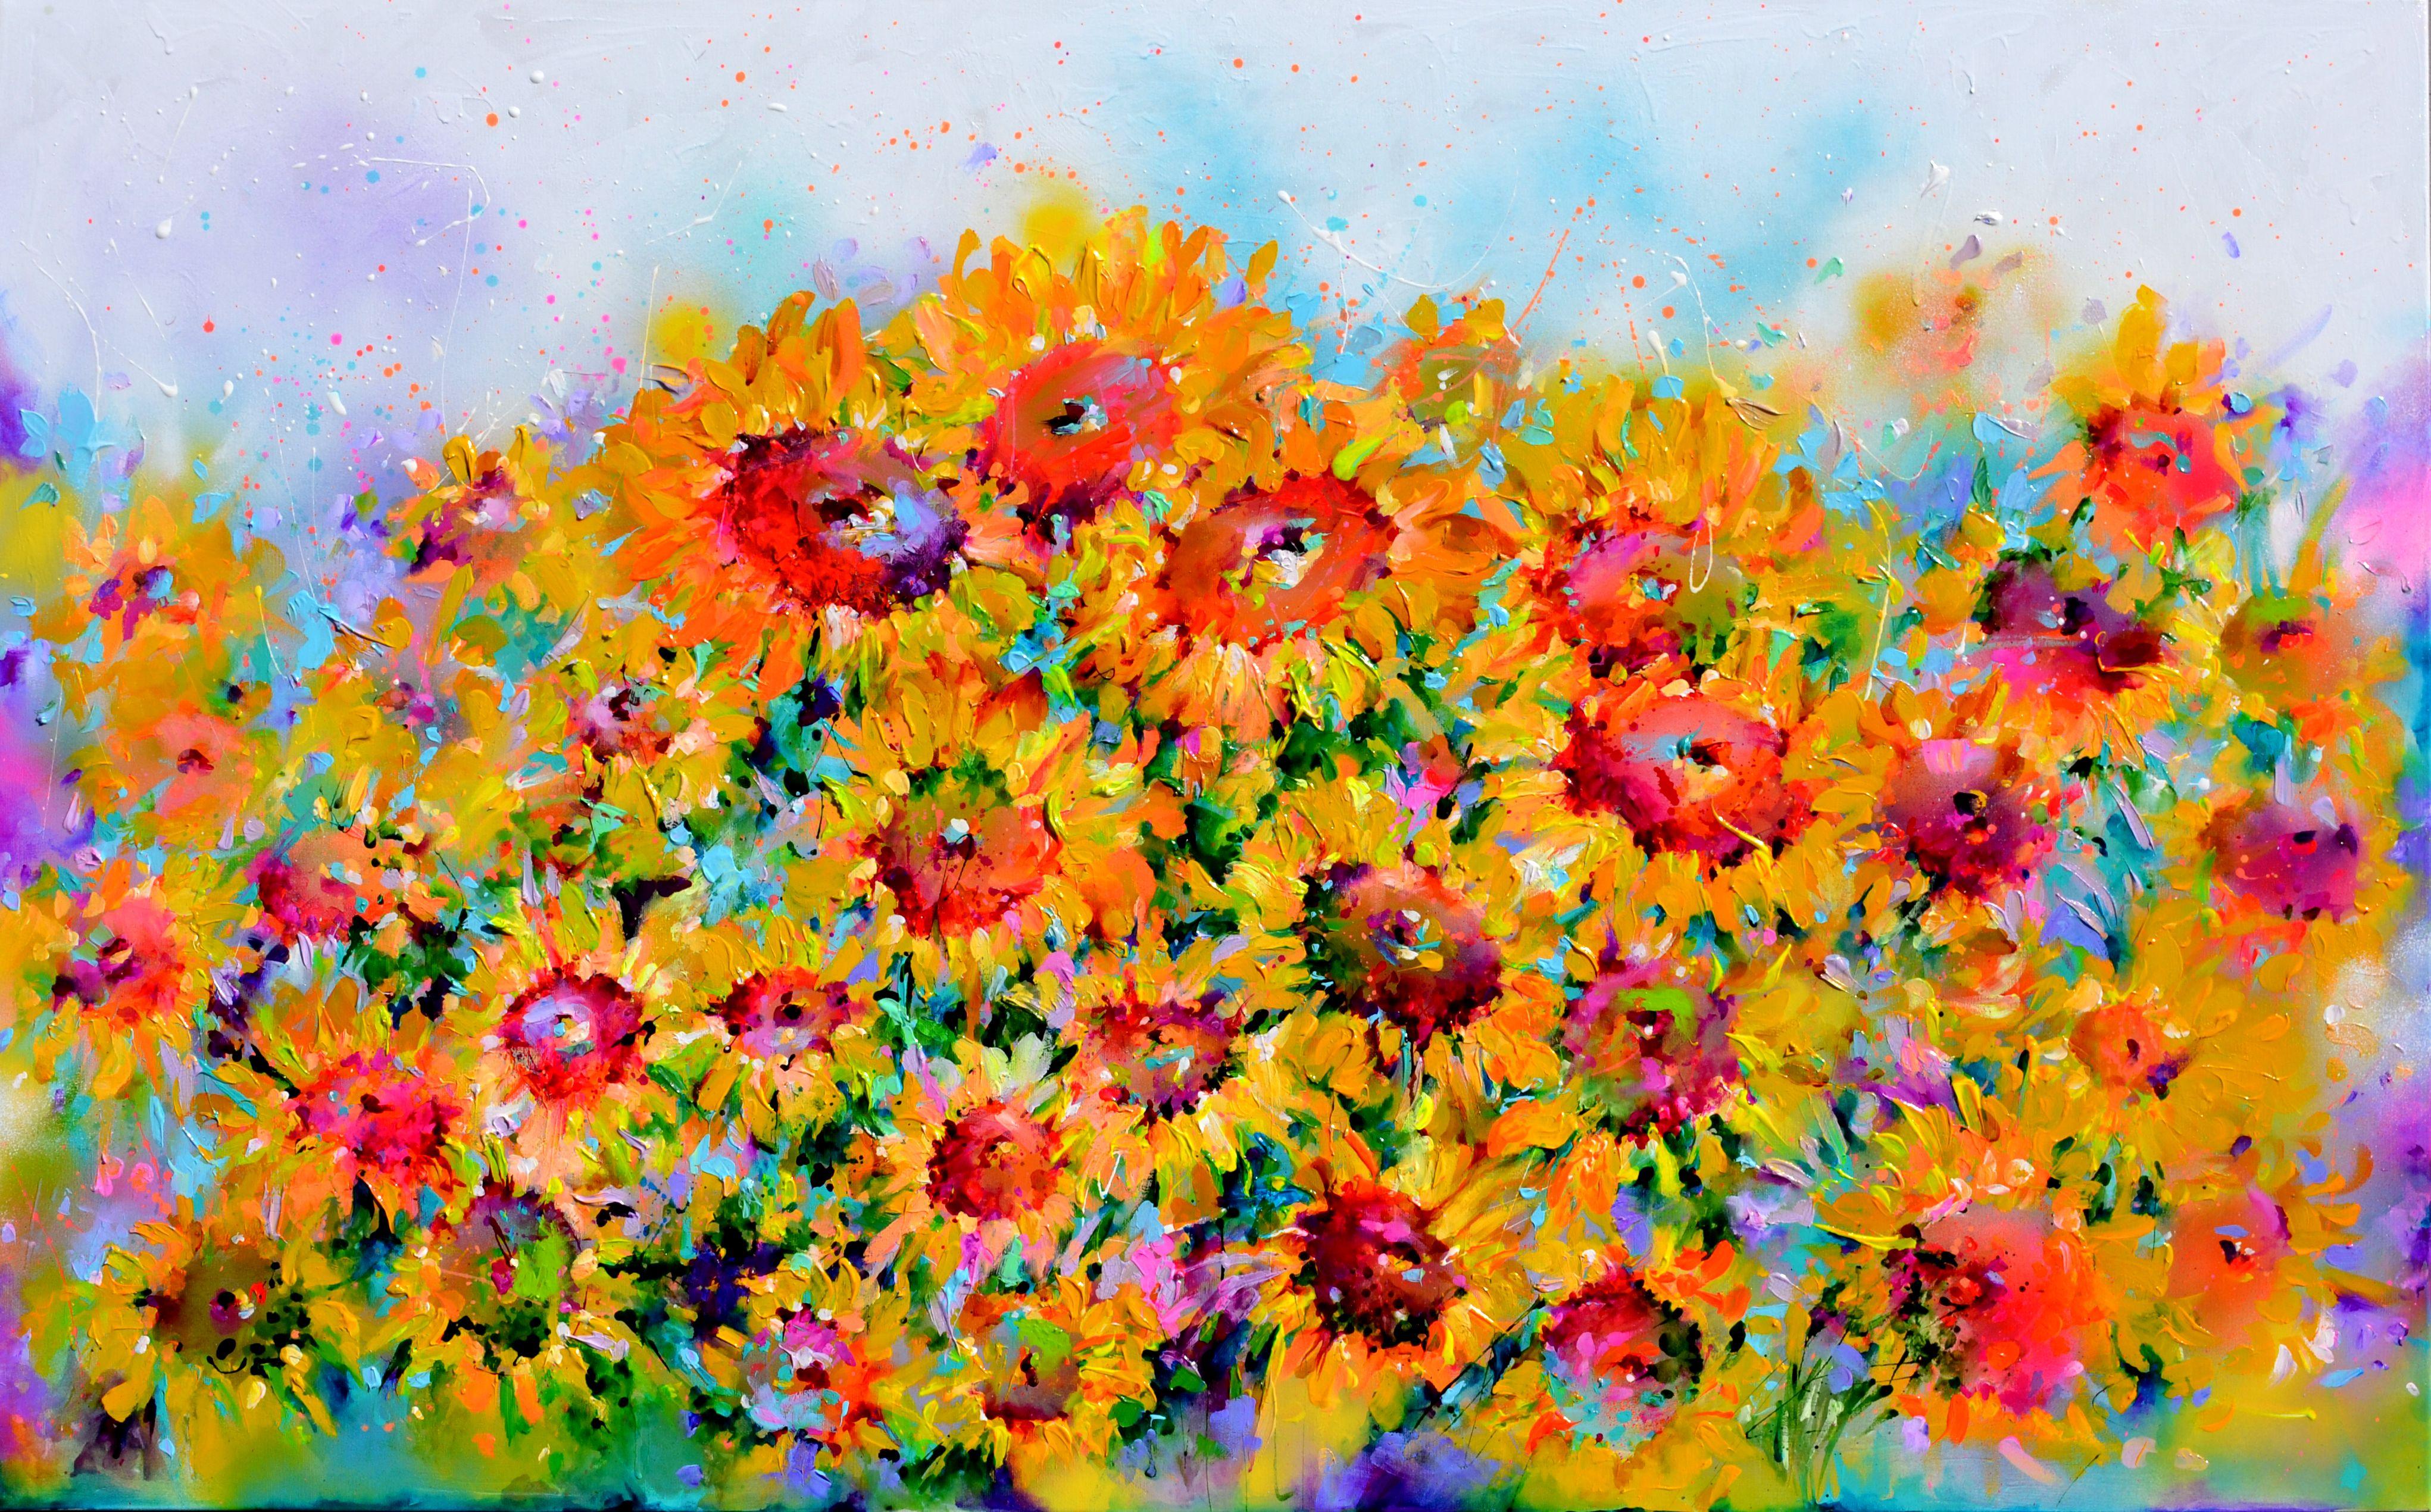 I've Dreamed 29 - Yellow Sunflower Field, Painting, Acrylic on Canvas